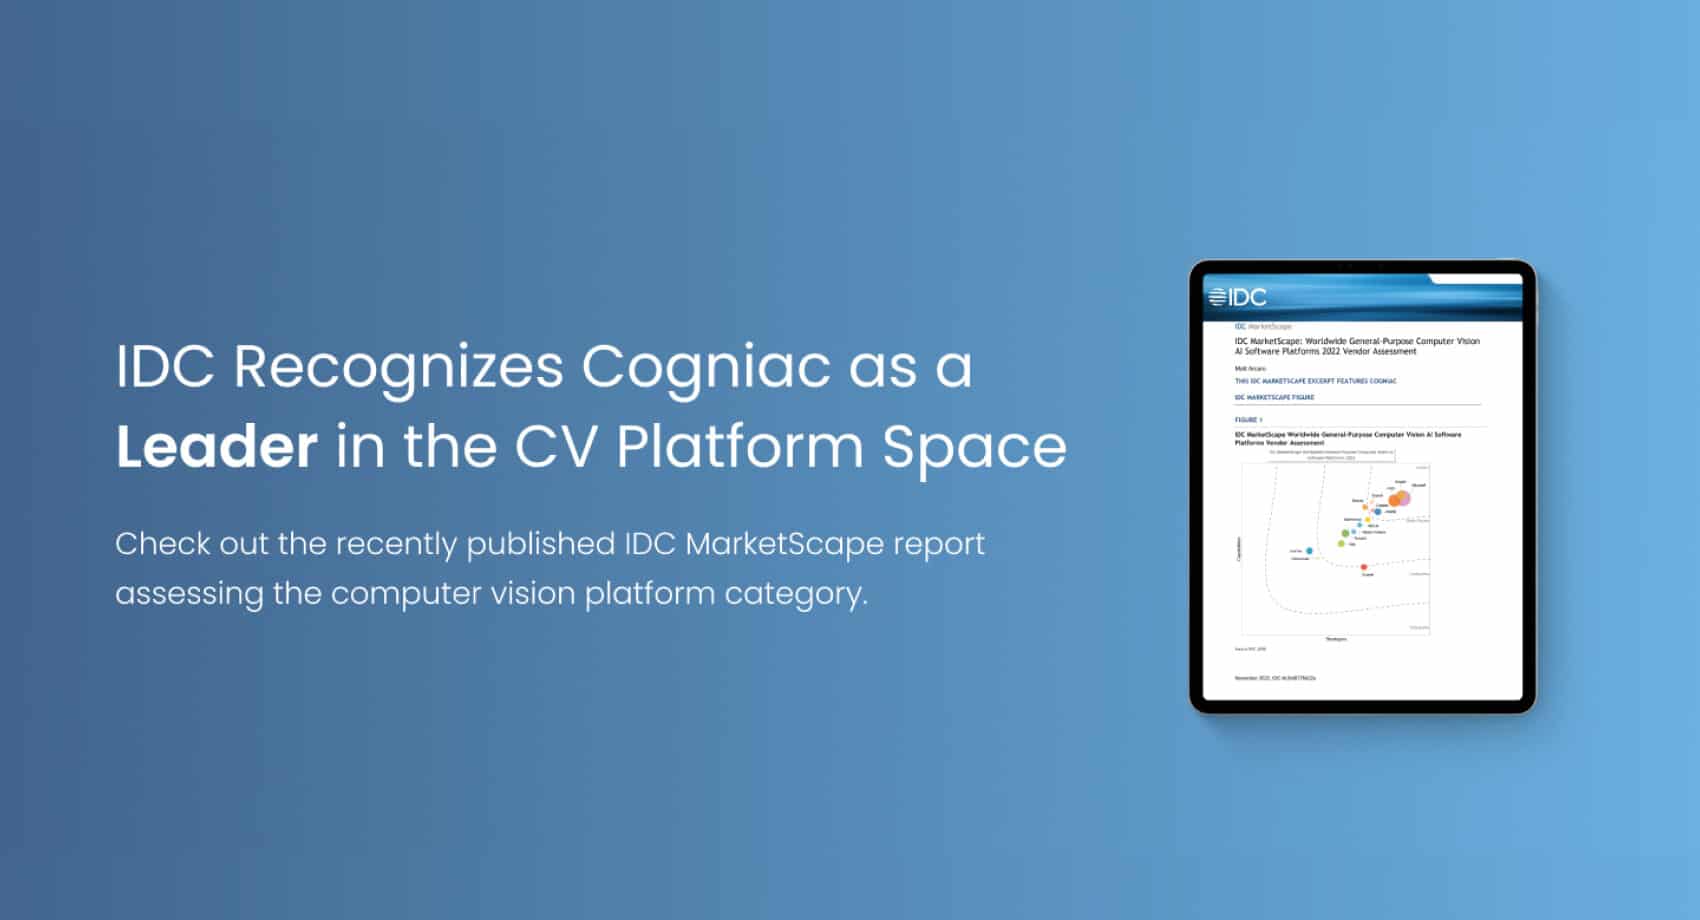 “Low complexity and high value.” Cogniac in the IDC MarketScape Report